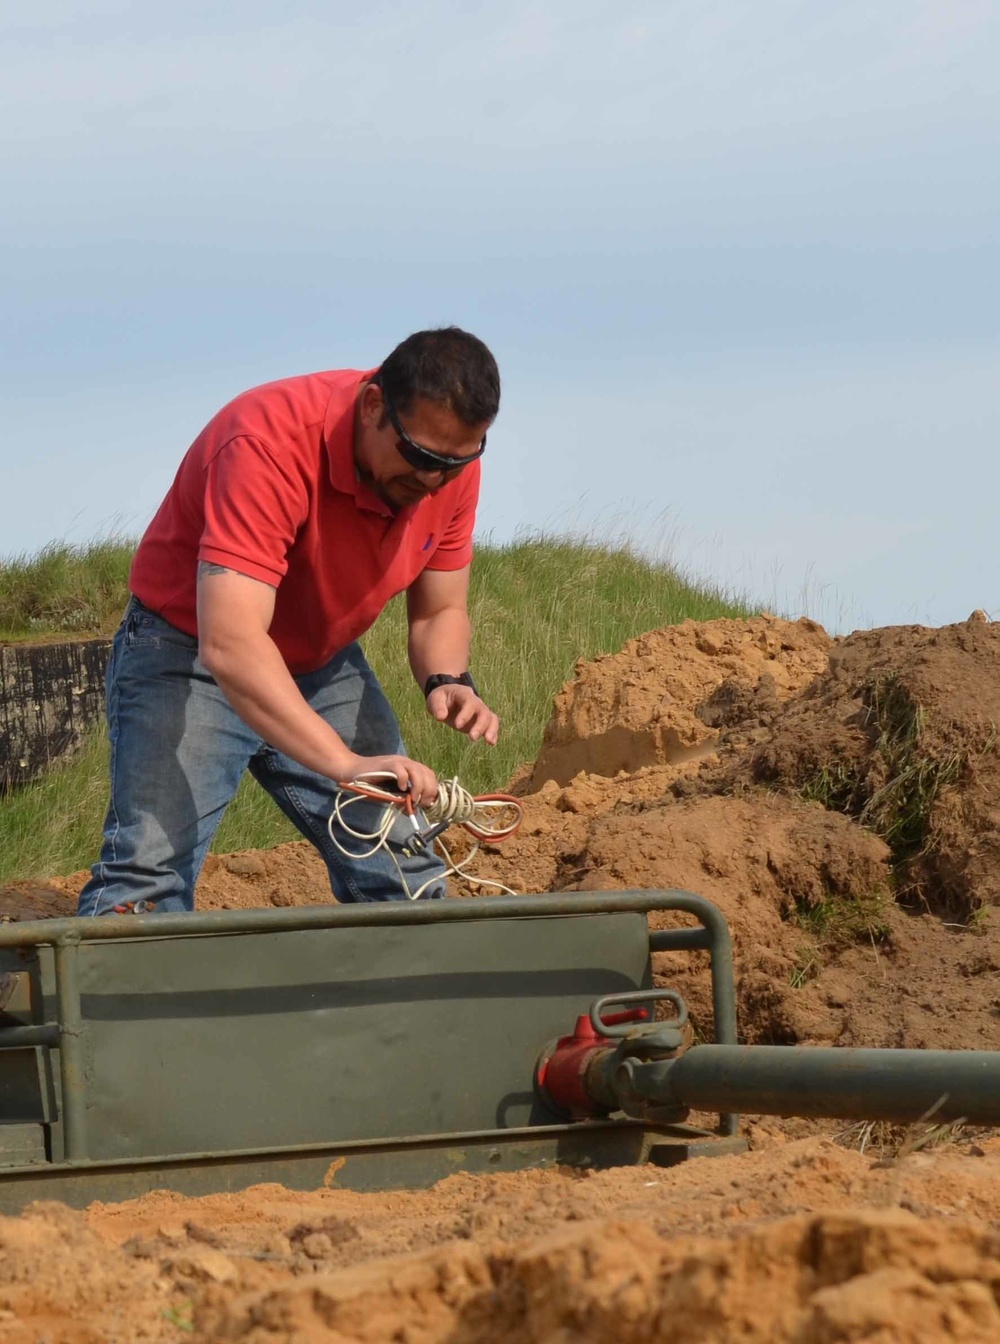 Still serving, Army veterans continue to make a difference in Operation Atlantic Resolve